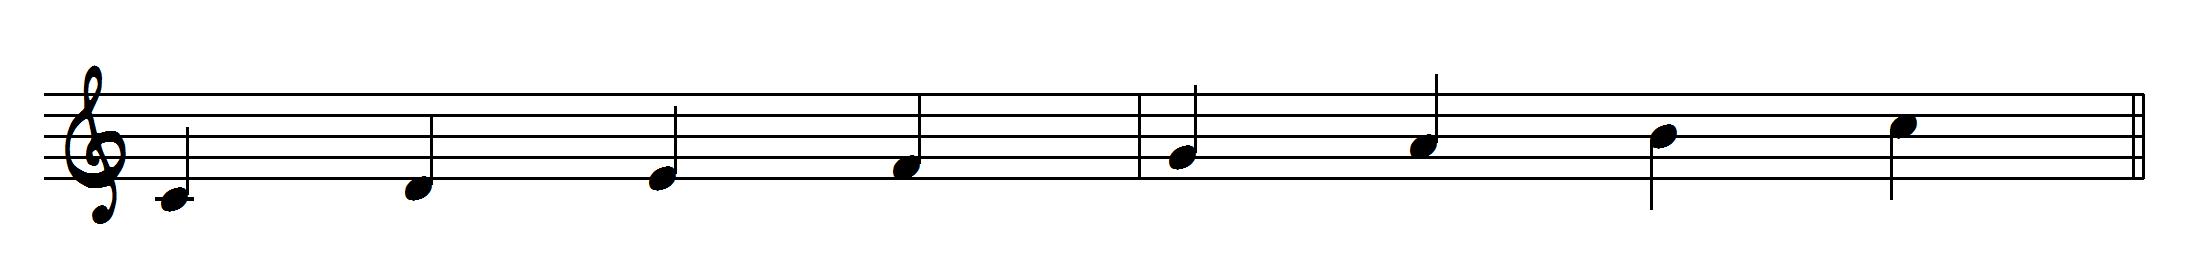 jazz scales: Ionian scale